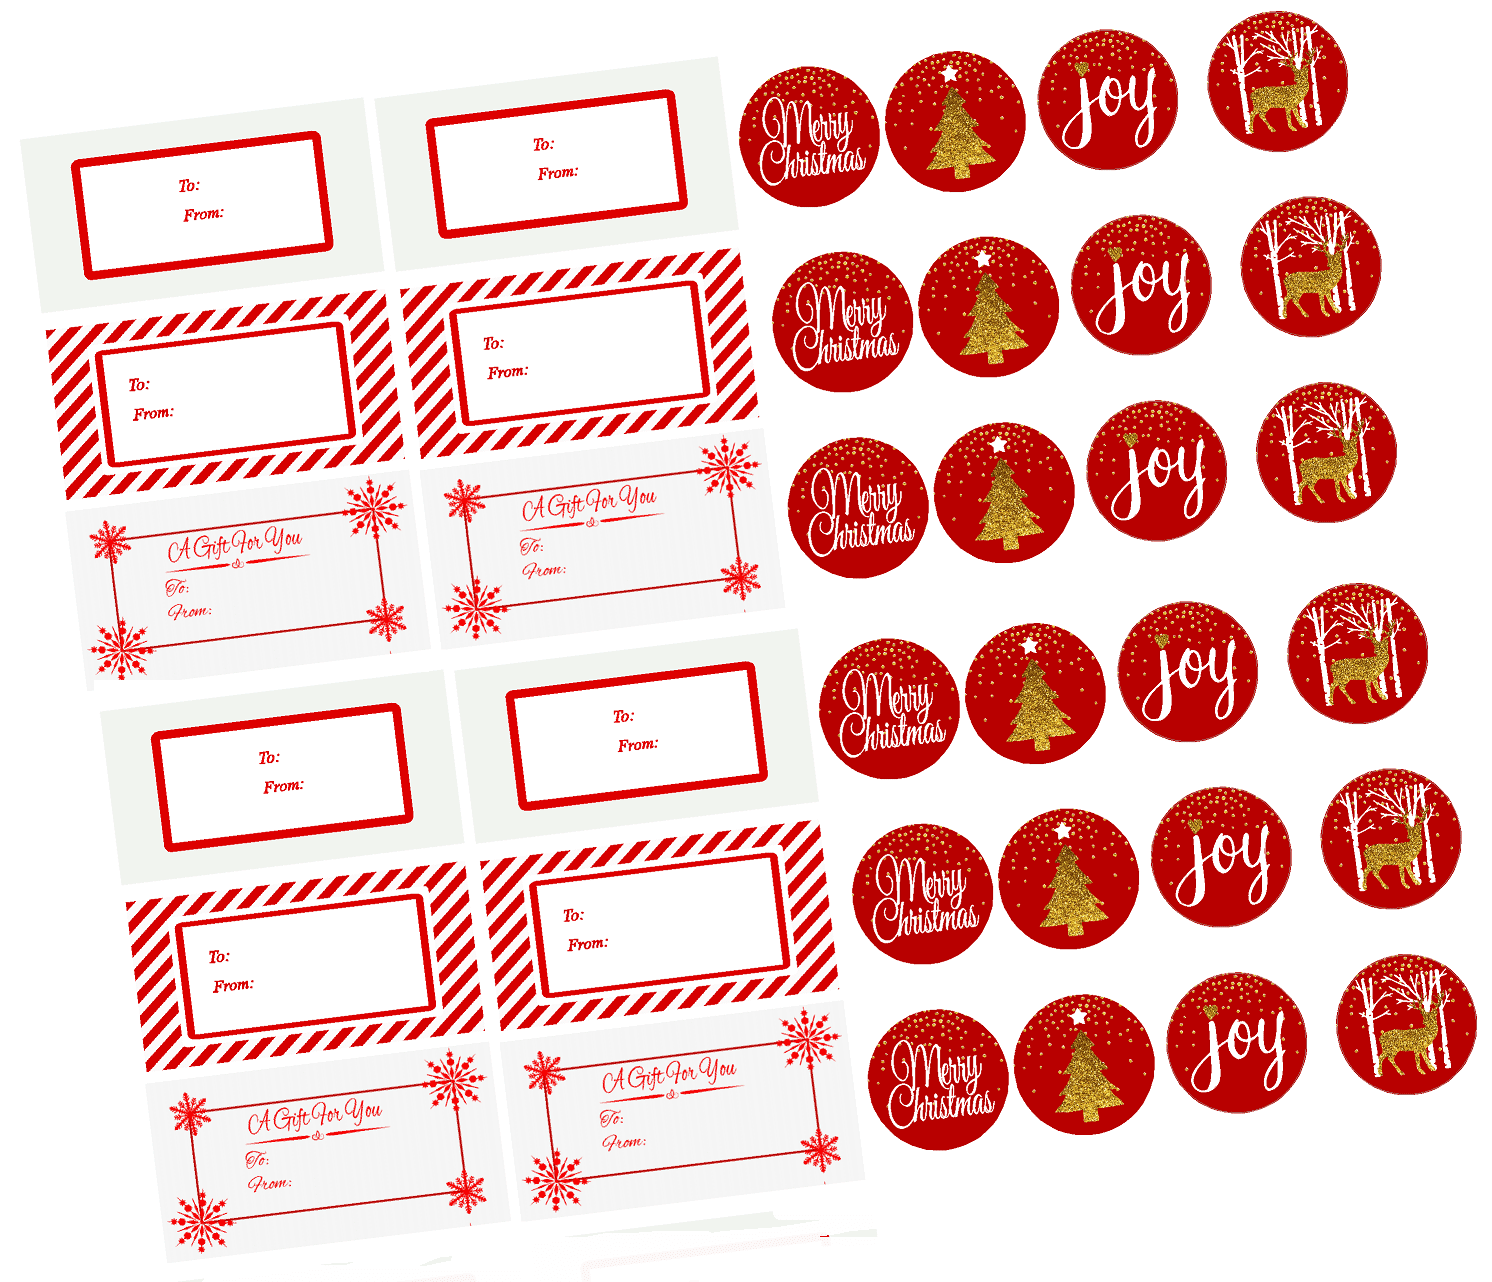 100 Labels on a Roll Elf Christmas Present Gift Tags 1.5 x 2.5 Inches in Size 